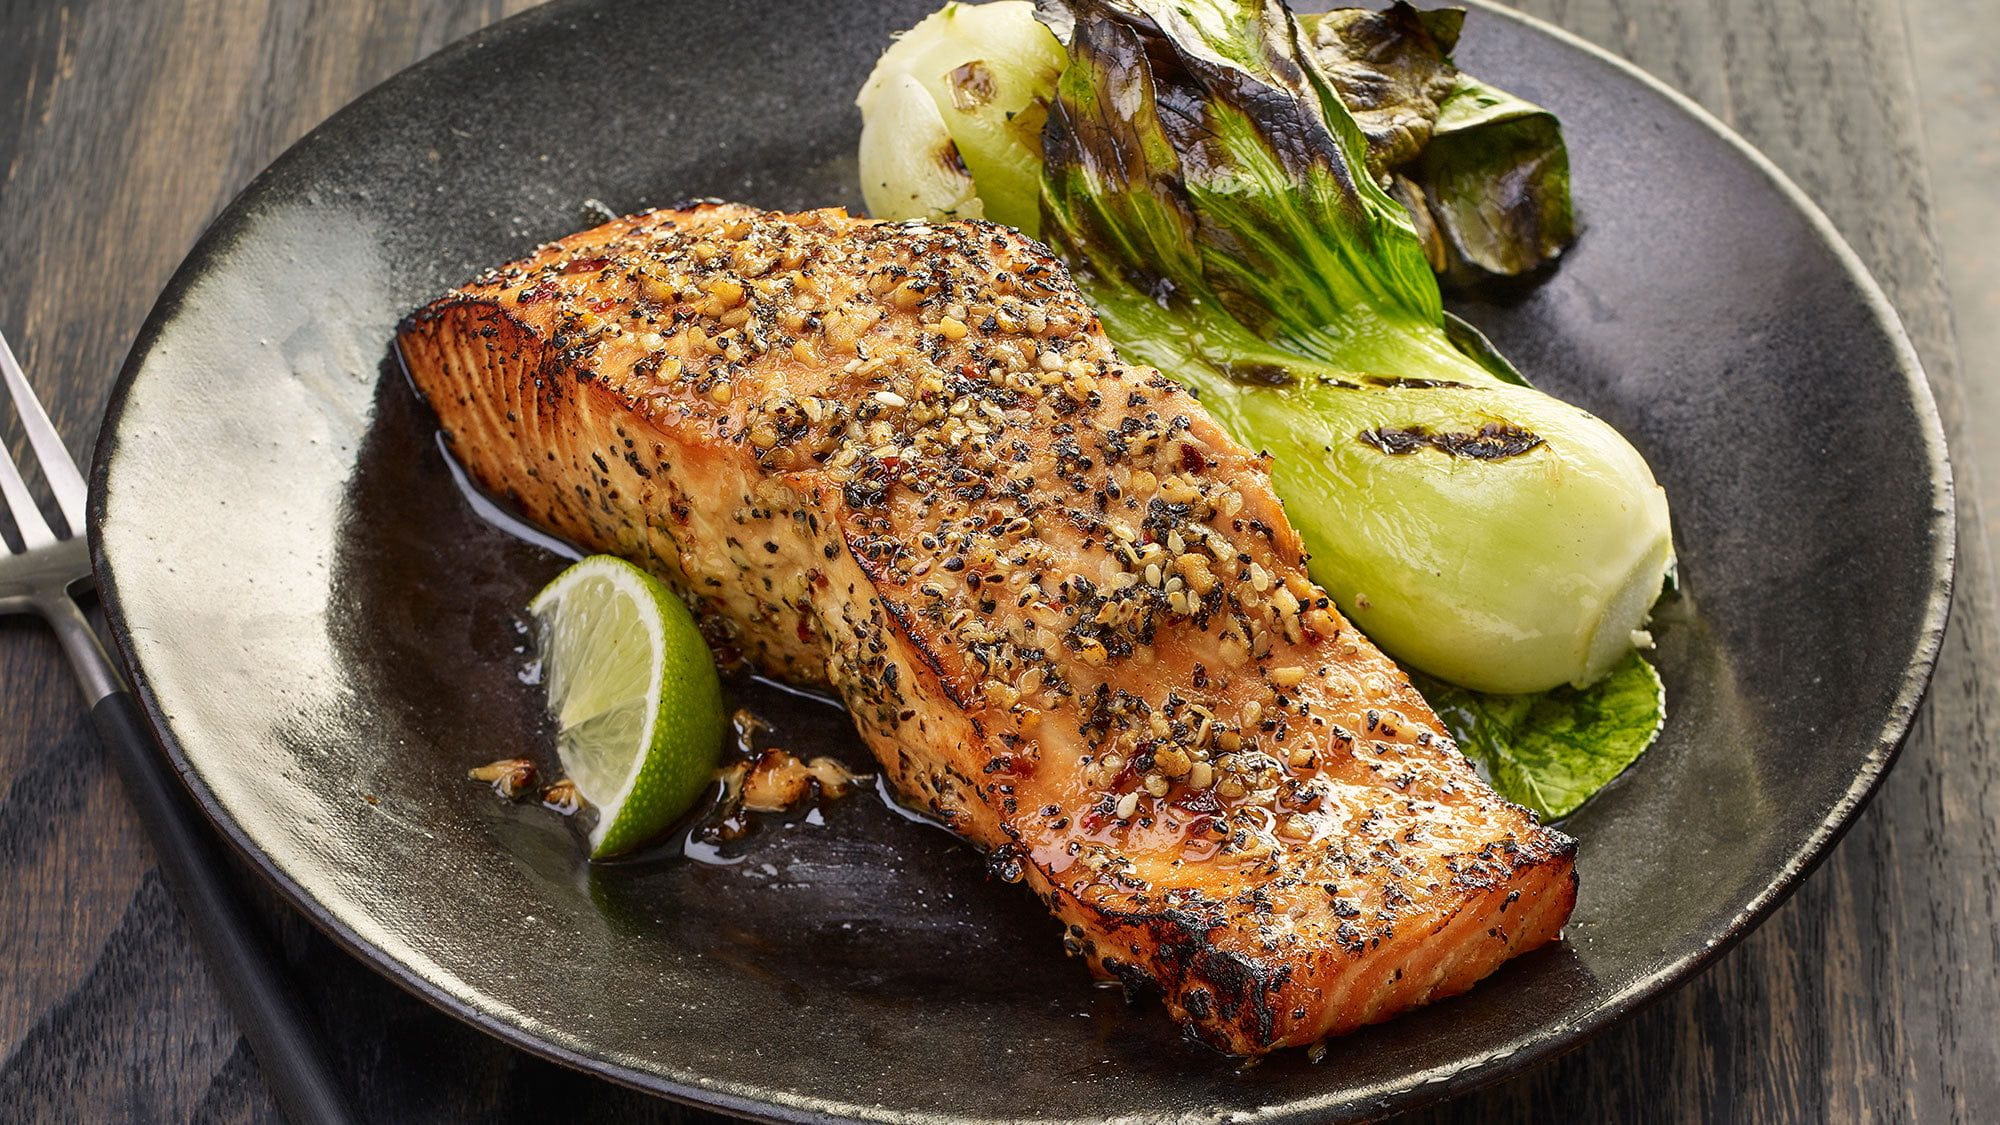 GRILLED SALMON WITH PEPPER SOY GLAZE